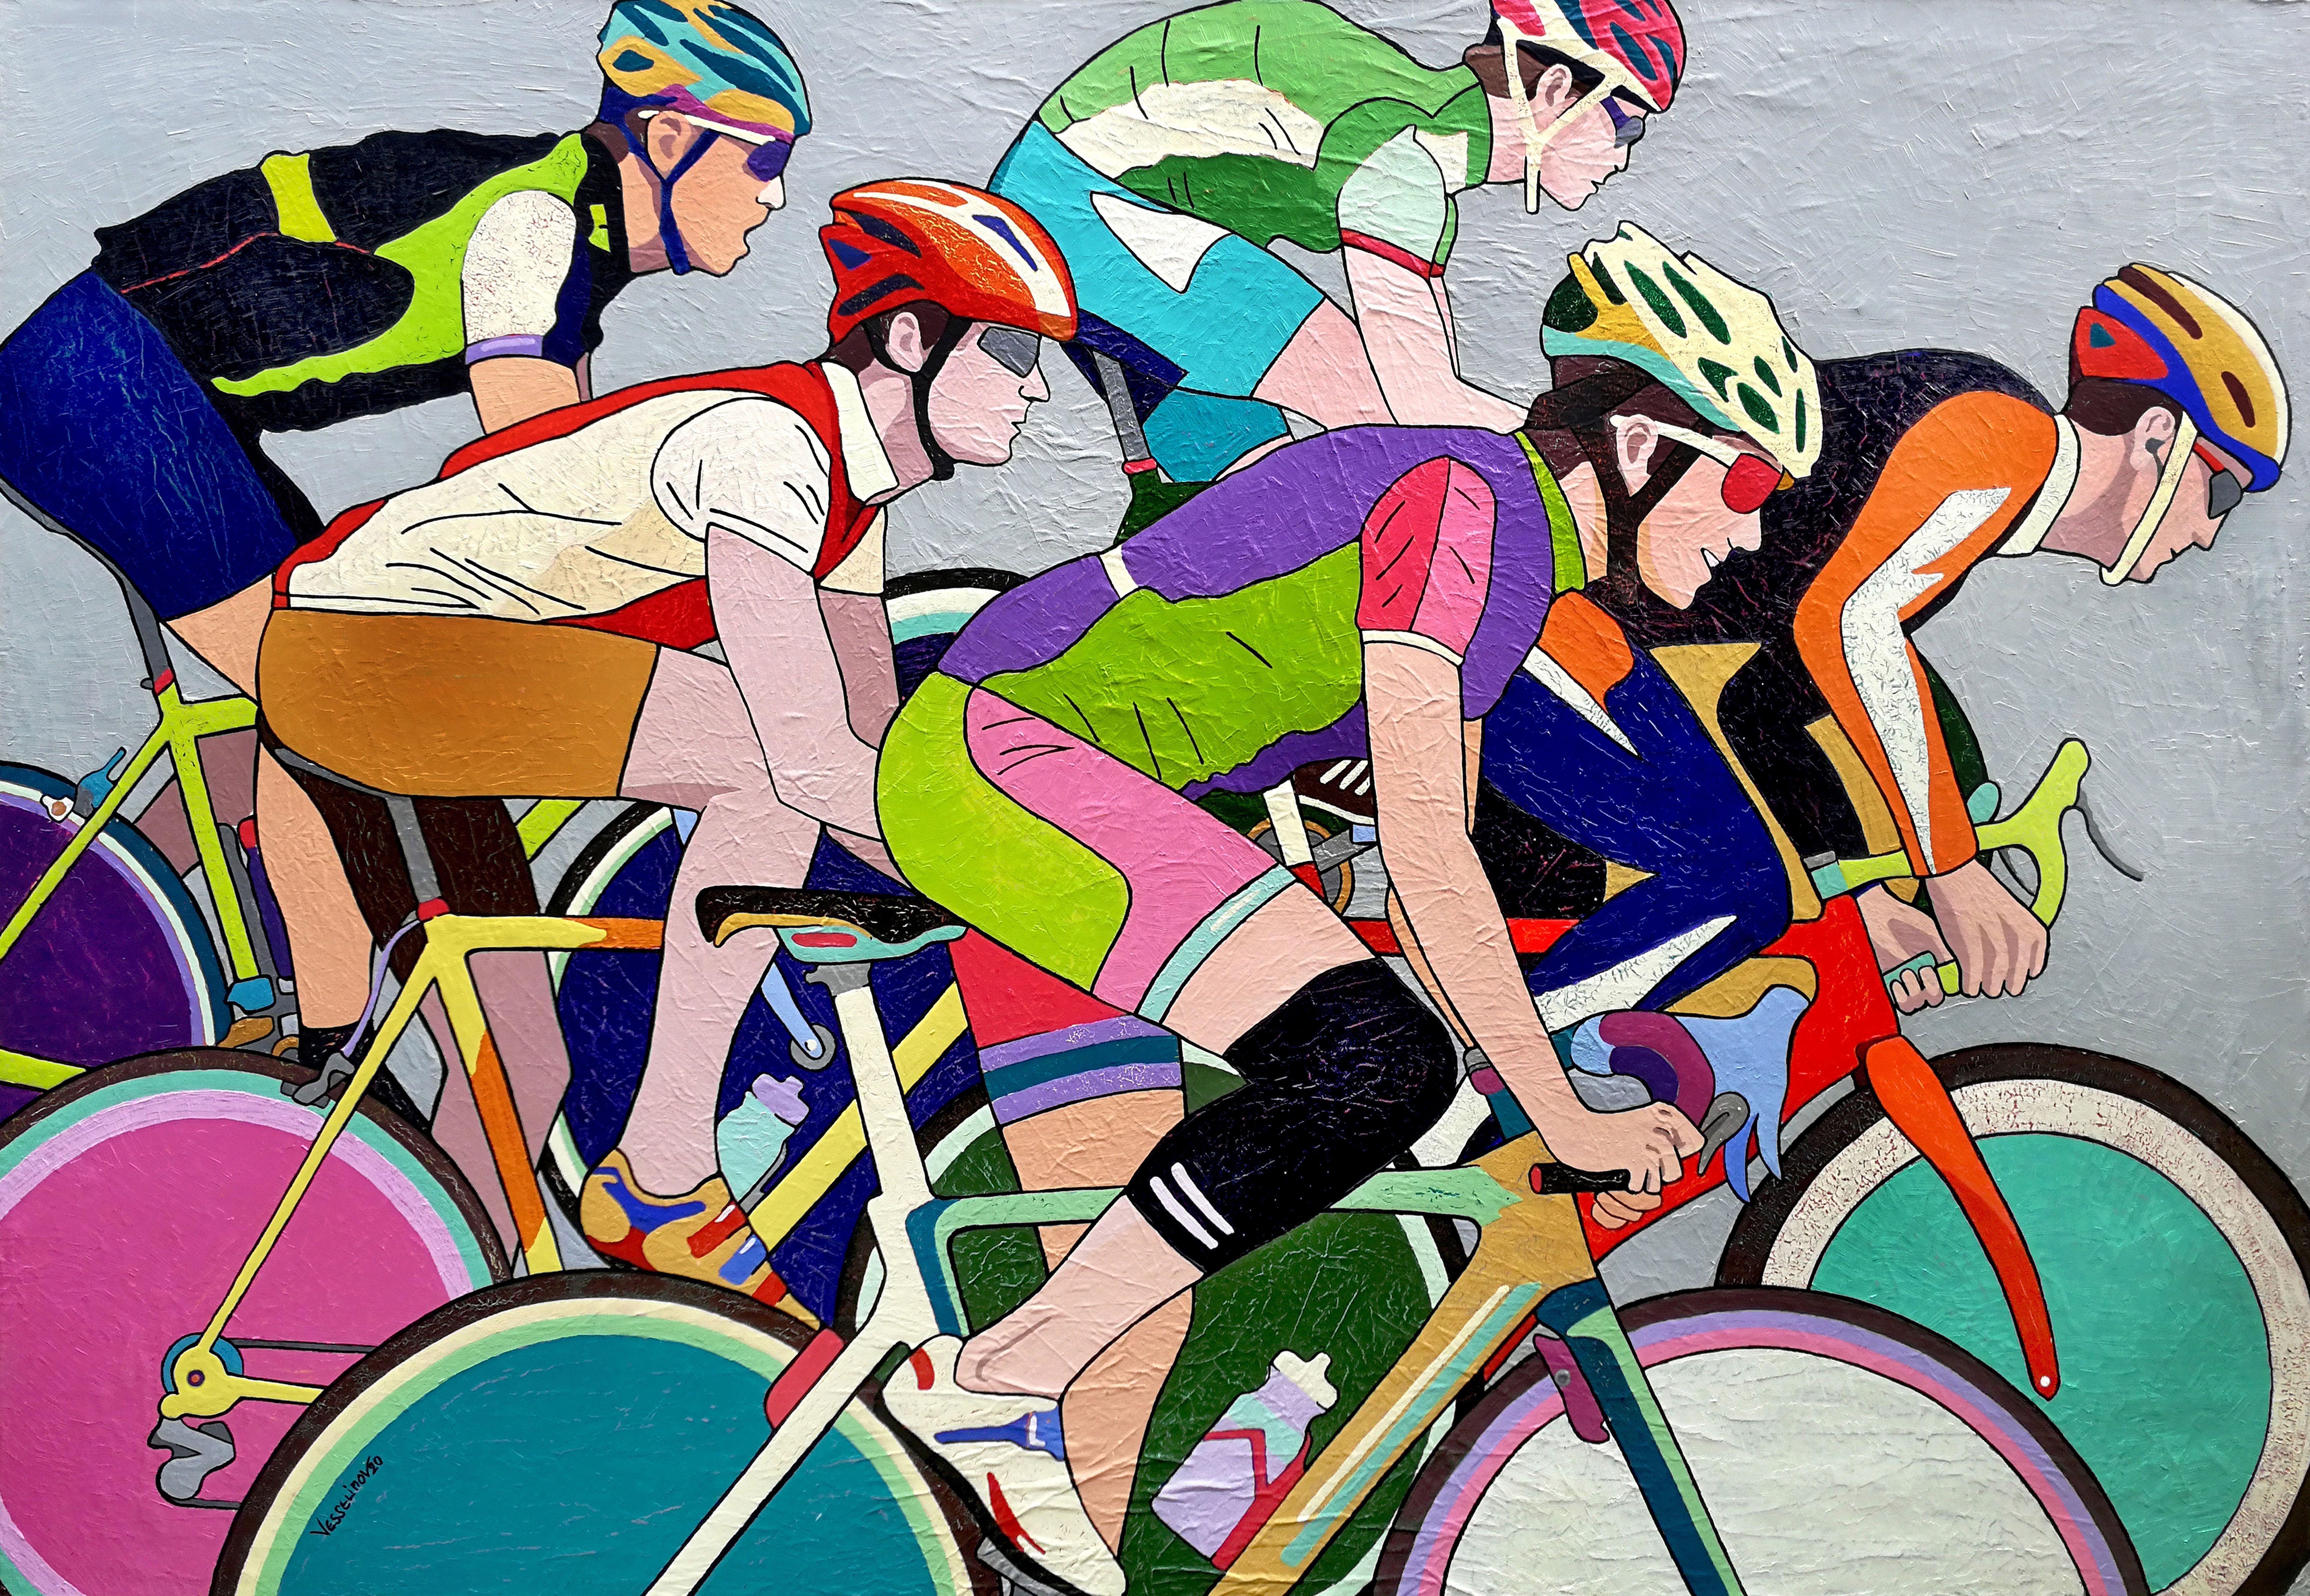 The work is inspired by the great cycling competitions, such as the Tour de France, the Giro d'Italia and many others. The tireless human spirit and the struggle of characters are leading and the battle is always beautiful.   The work is painted